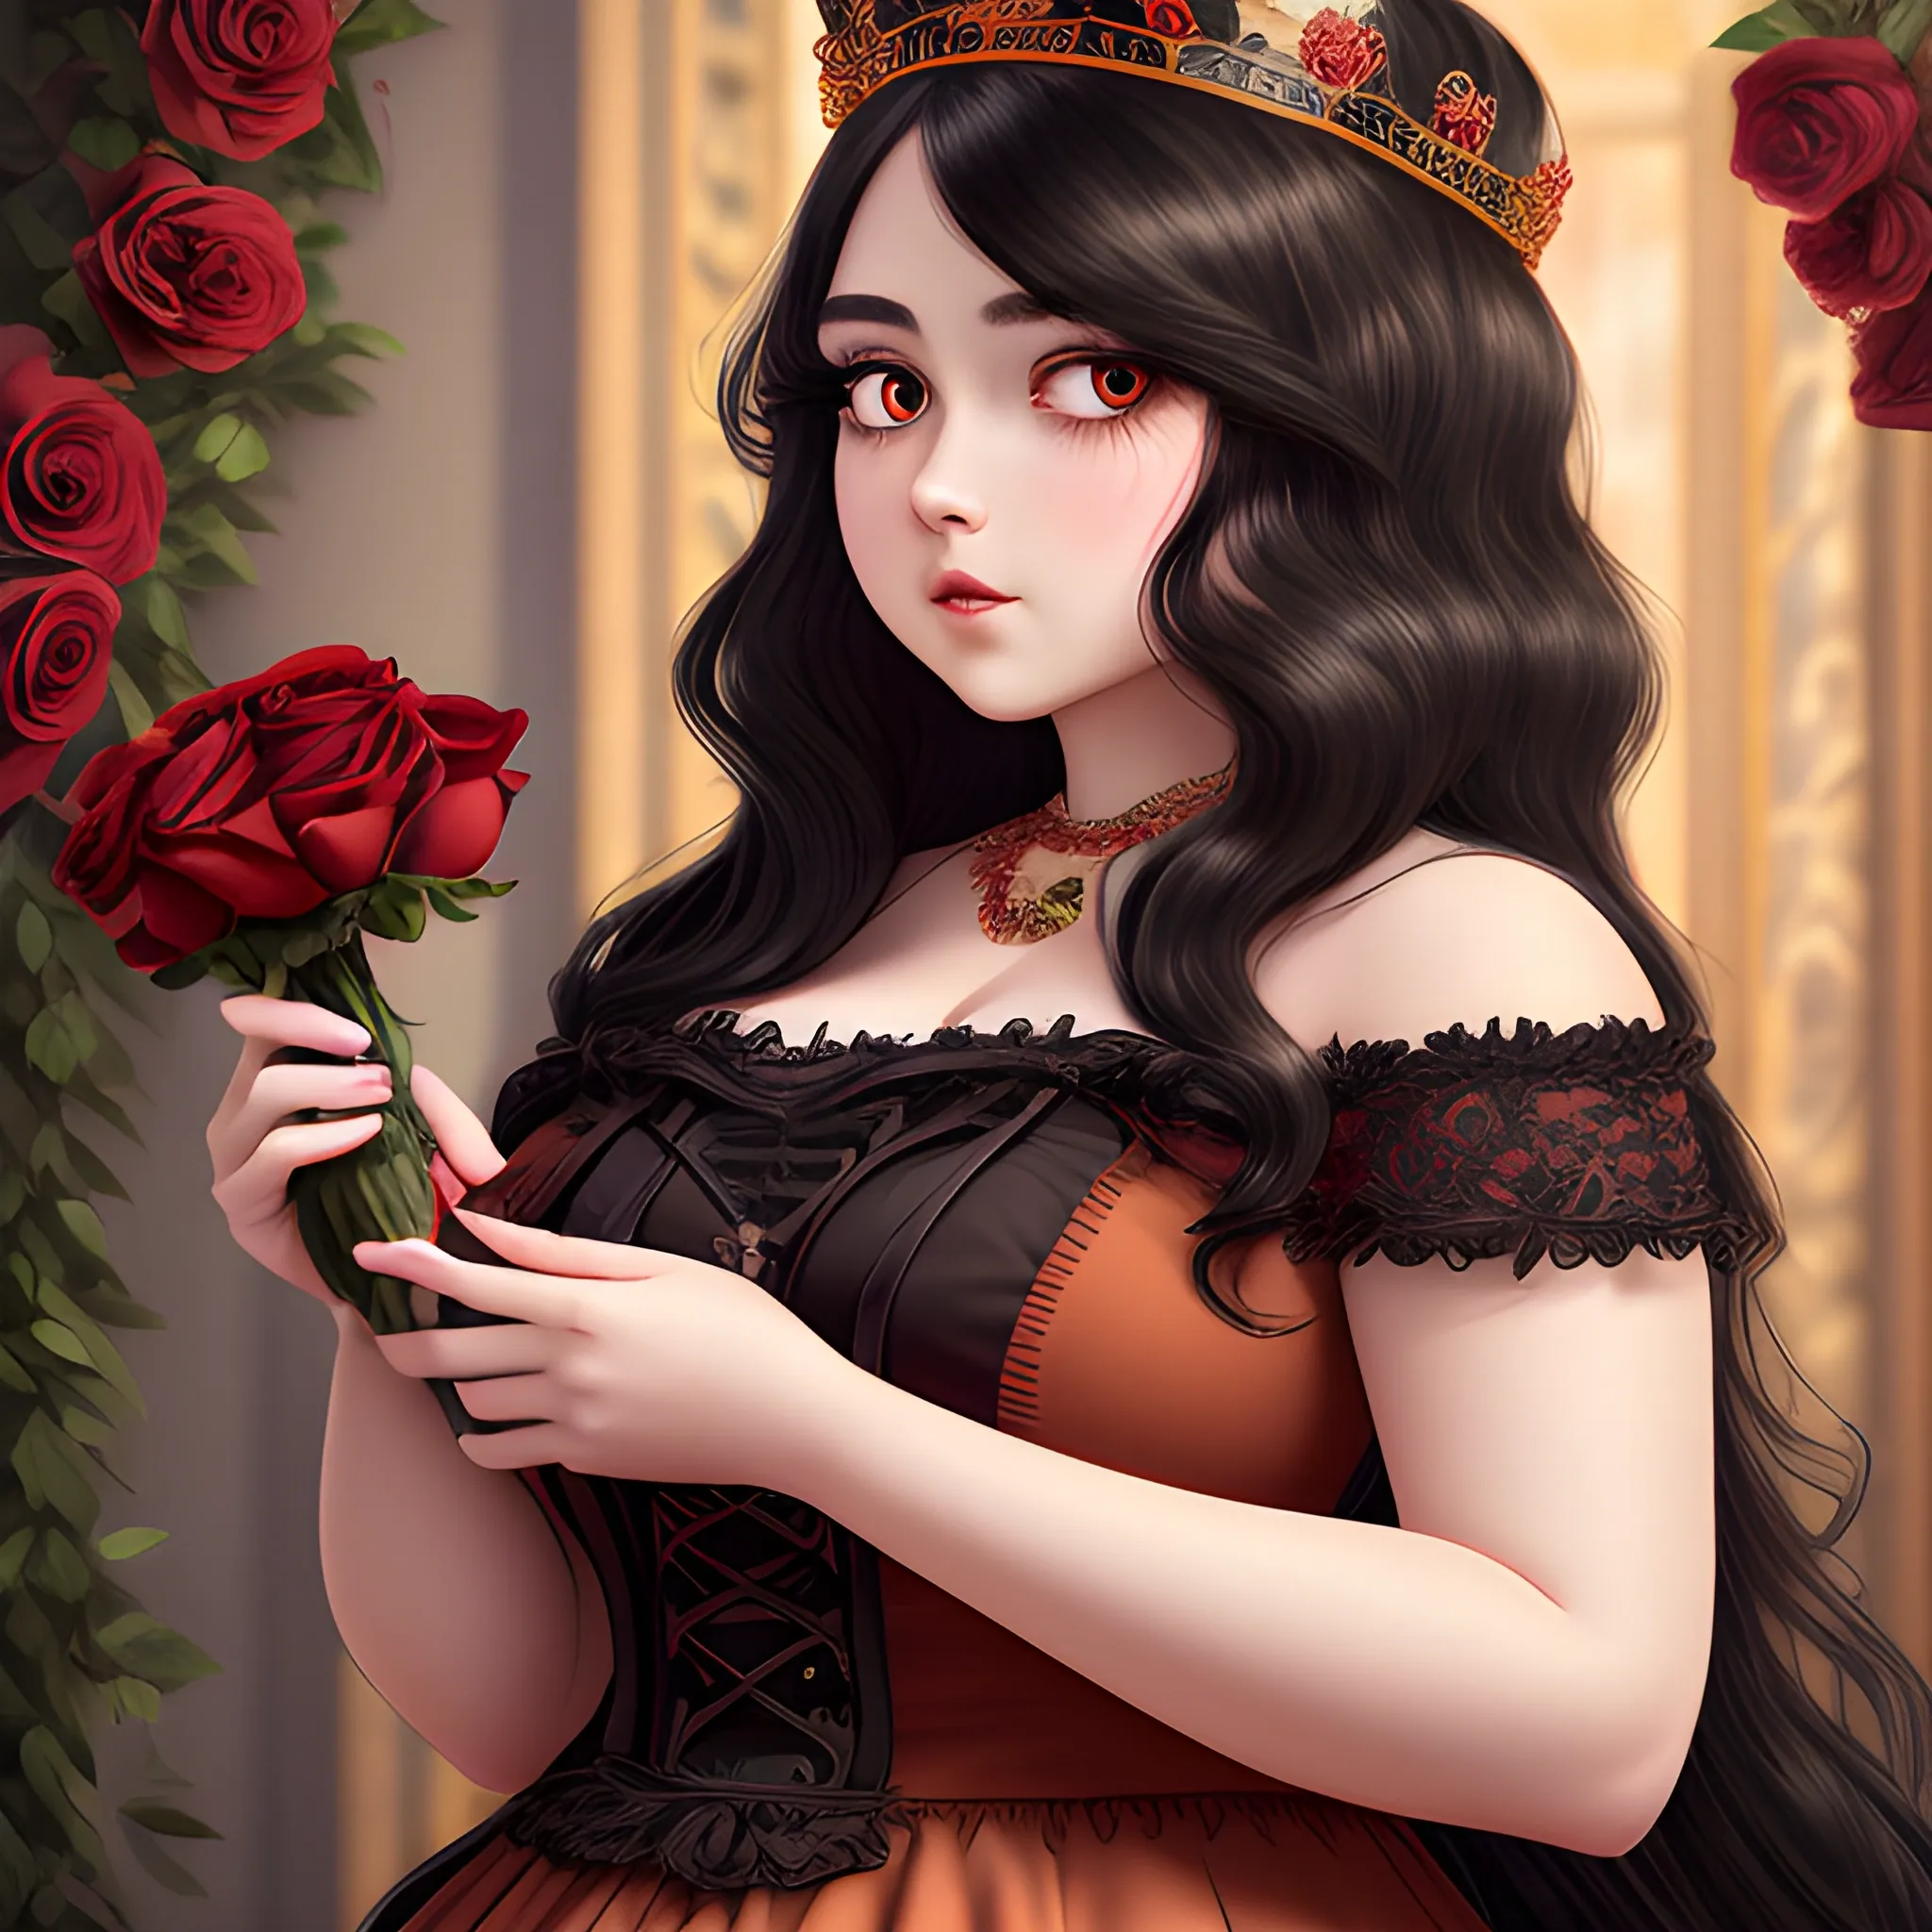 (((high detail))), best quality, Warm Colors, (detailed), (high resolution)Black long-haired female adult, full body, curvy face, with rosy cheeks, big black eyes, thick eyelashes, thick peach lips, thick eyebrows,  with a black and red dress holding a bloody crown in her hand, roses of backround , wallper  , 